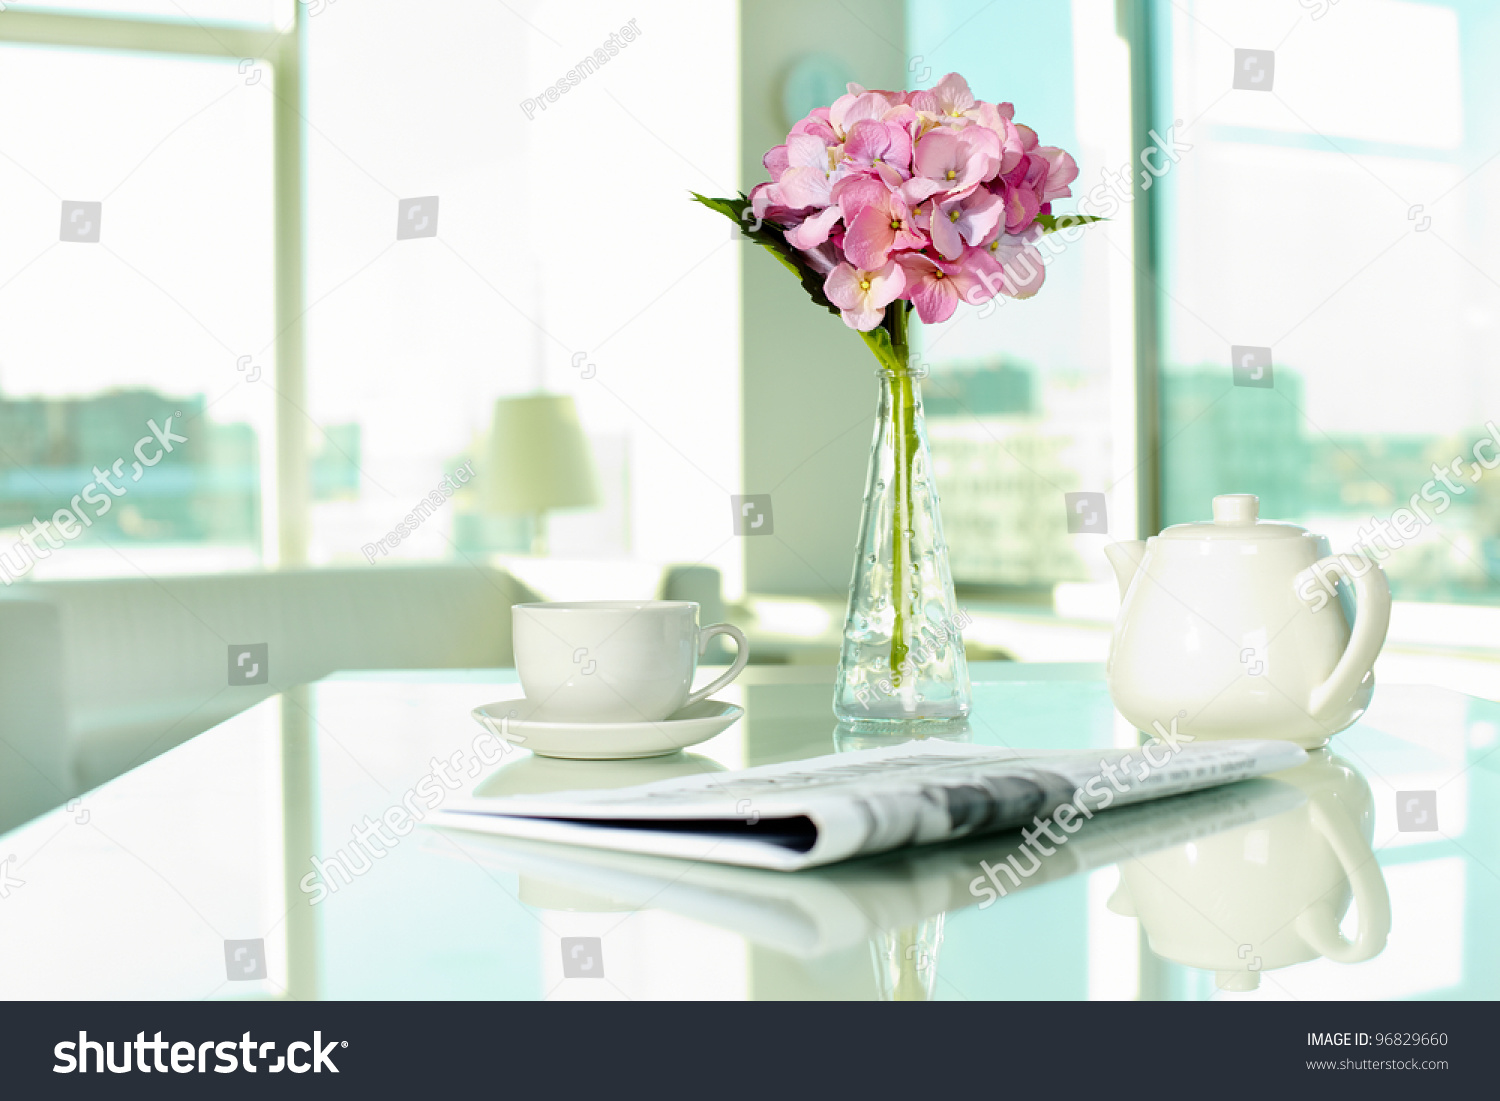 Workplace with porcelain cup and pot, newspaper and bunch of flowers #96829660